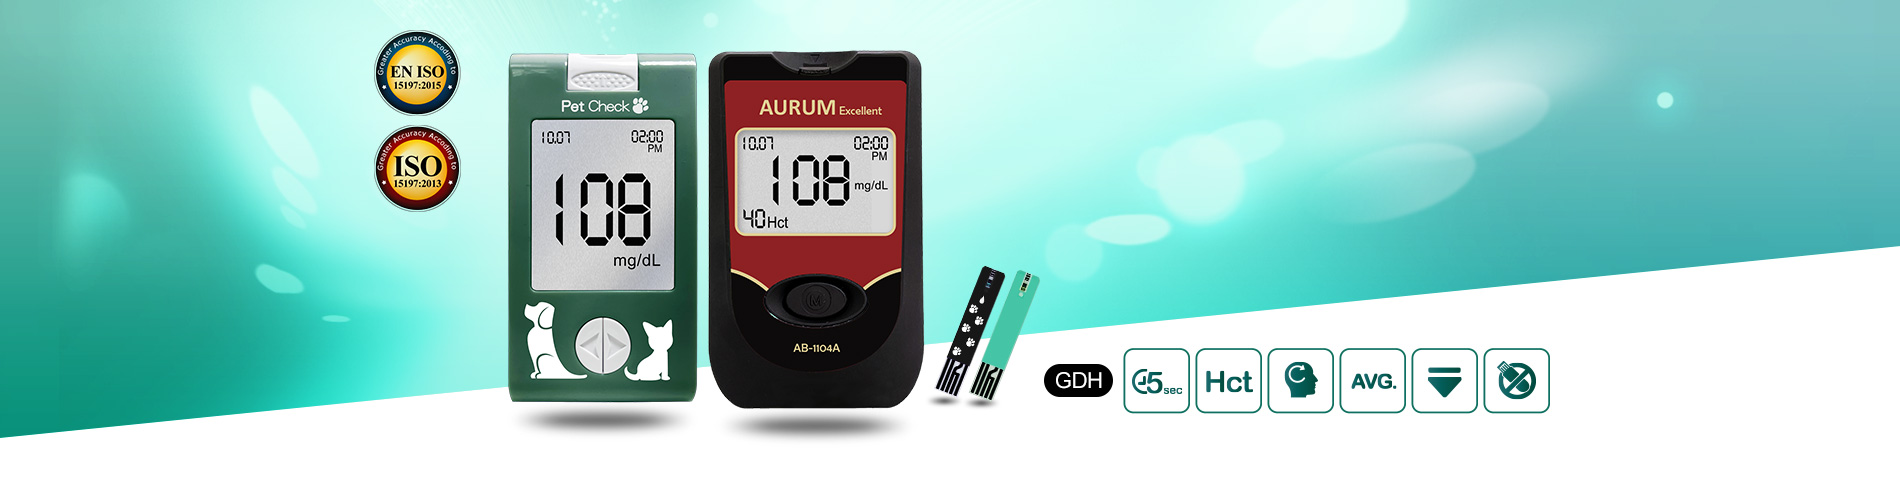 Quick Reaction & High Accuracy Glucometer & Hct Kit